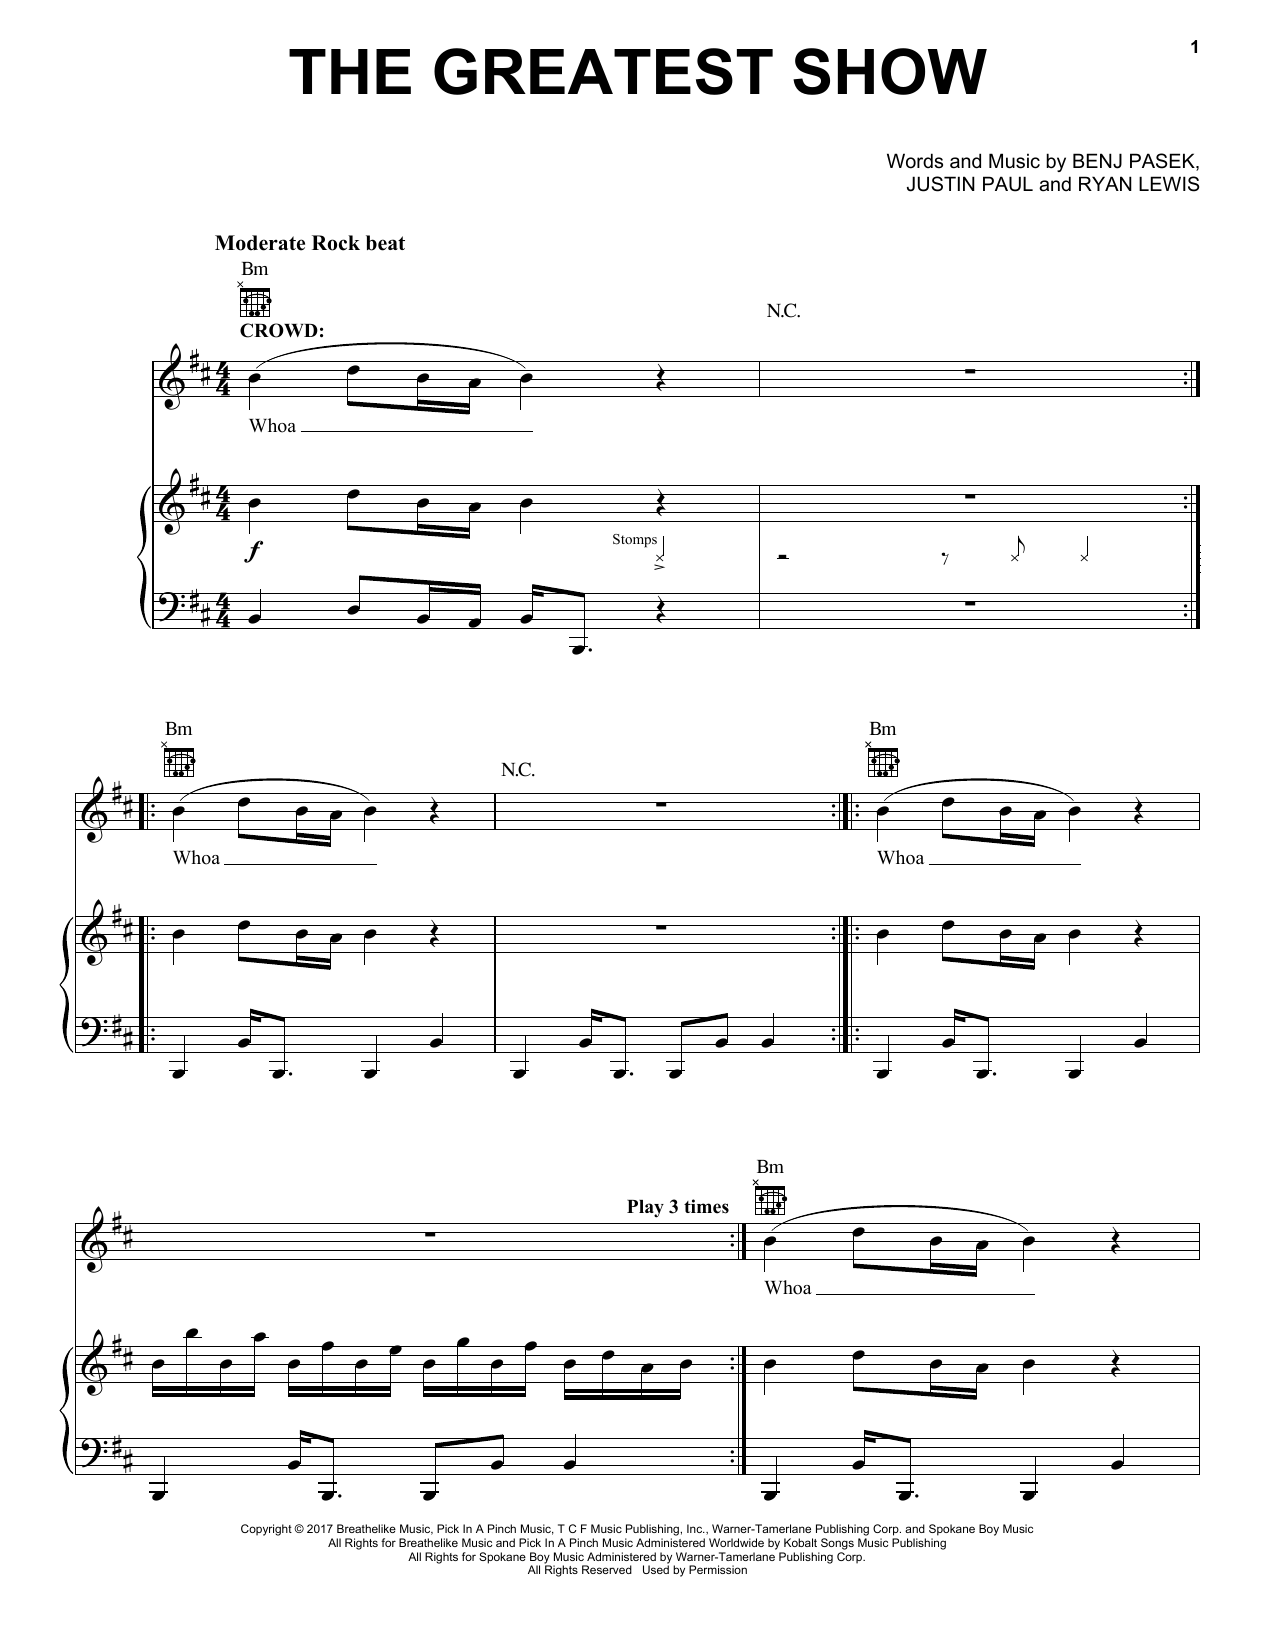 Pasek & Paul The Greatest Show (from The Greatest Showman) sheet music notes printable PDF score